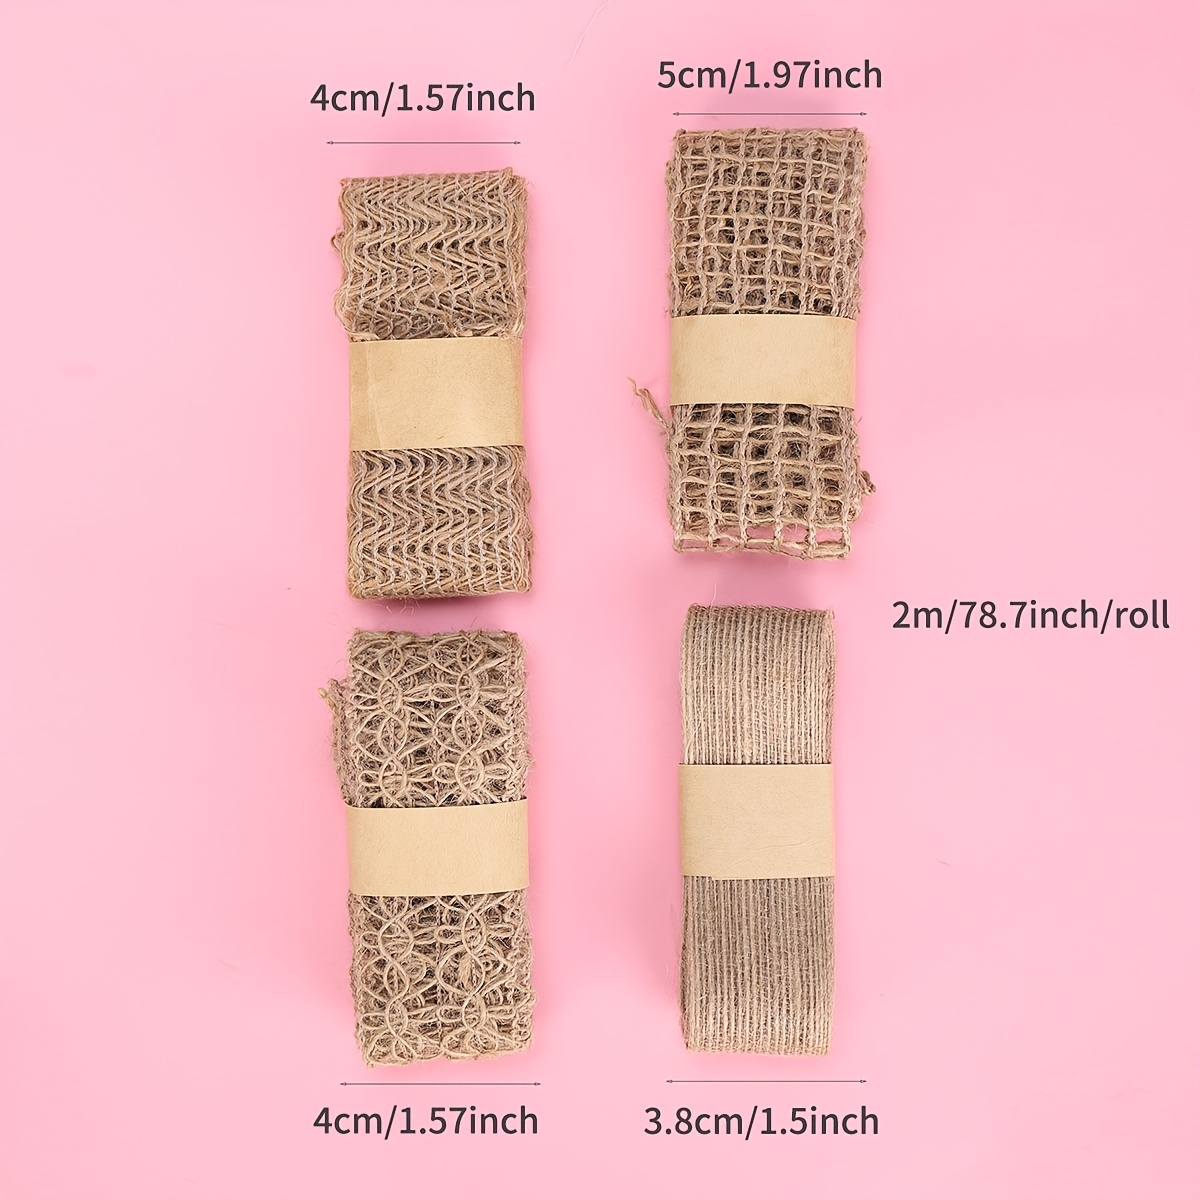 10 Yard Burlap Natural Color Fabric Ribbon Roll for Arts & Crafts Homemade DIY Projects, Event